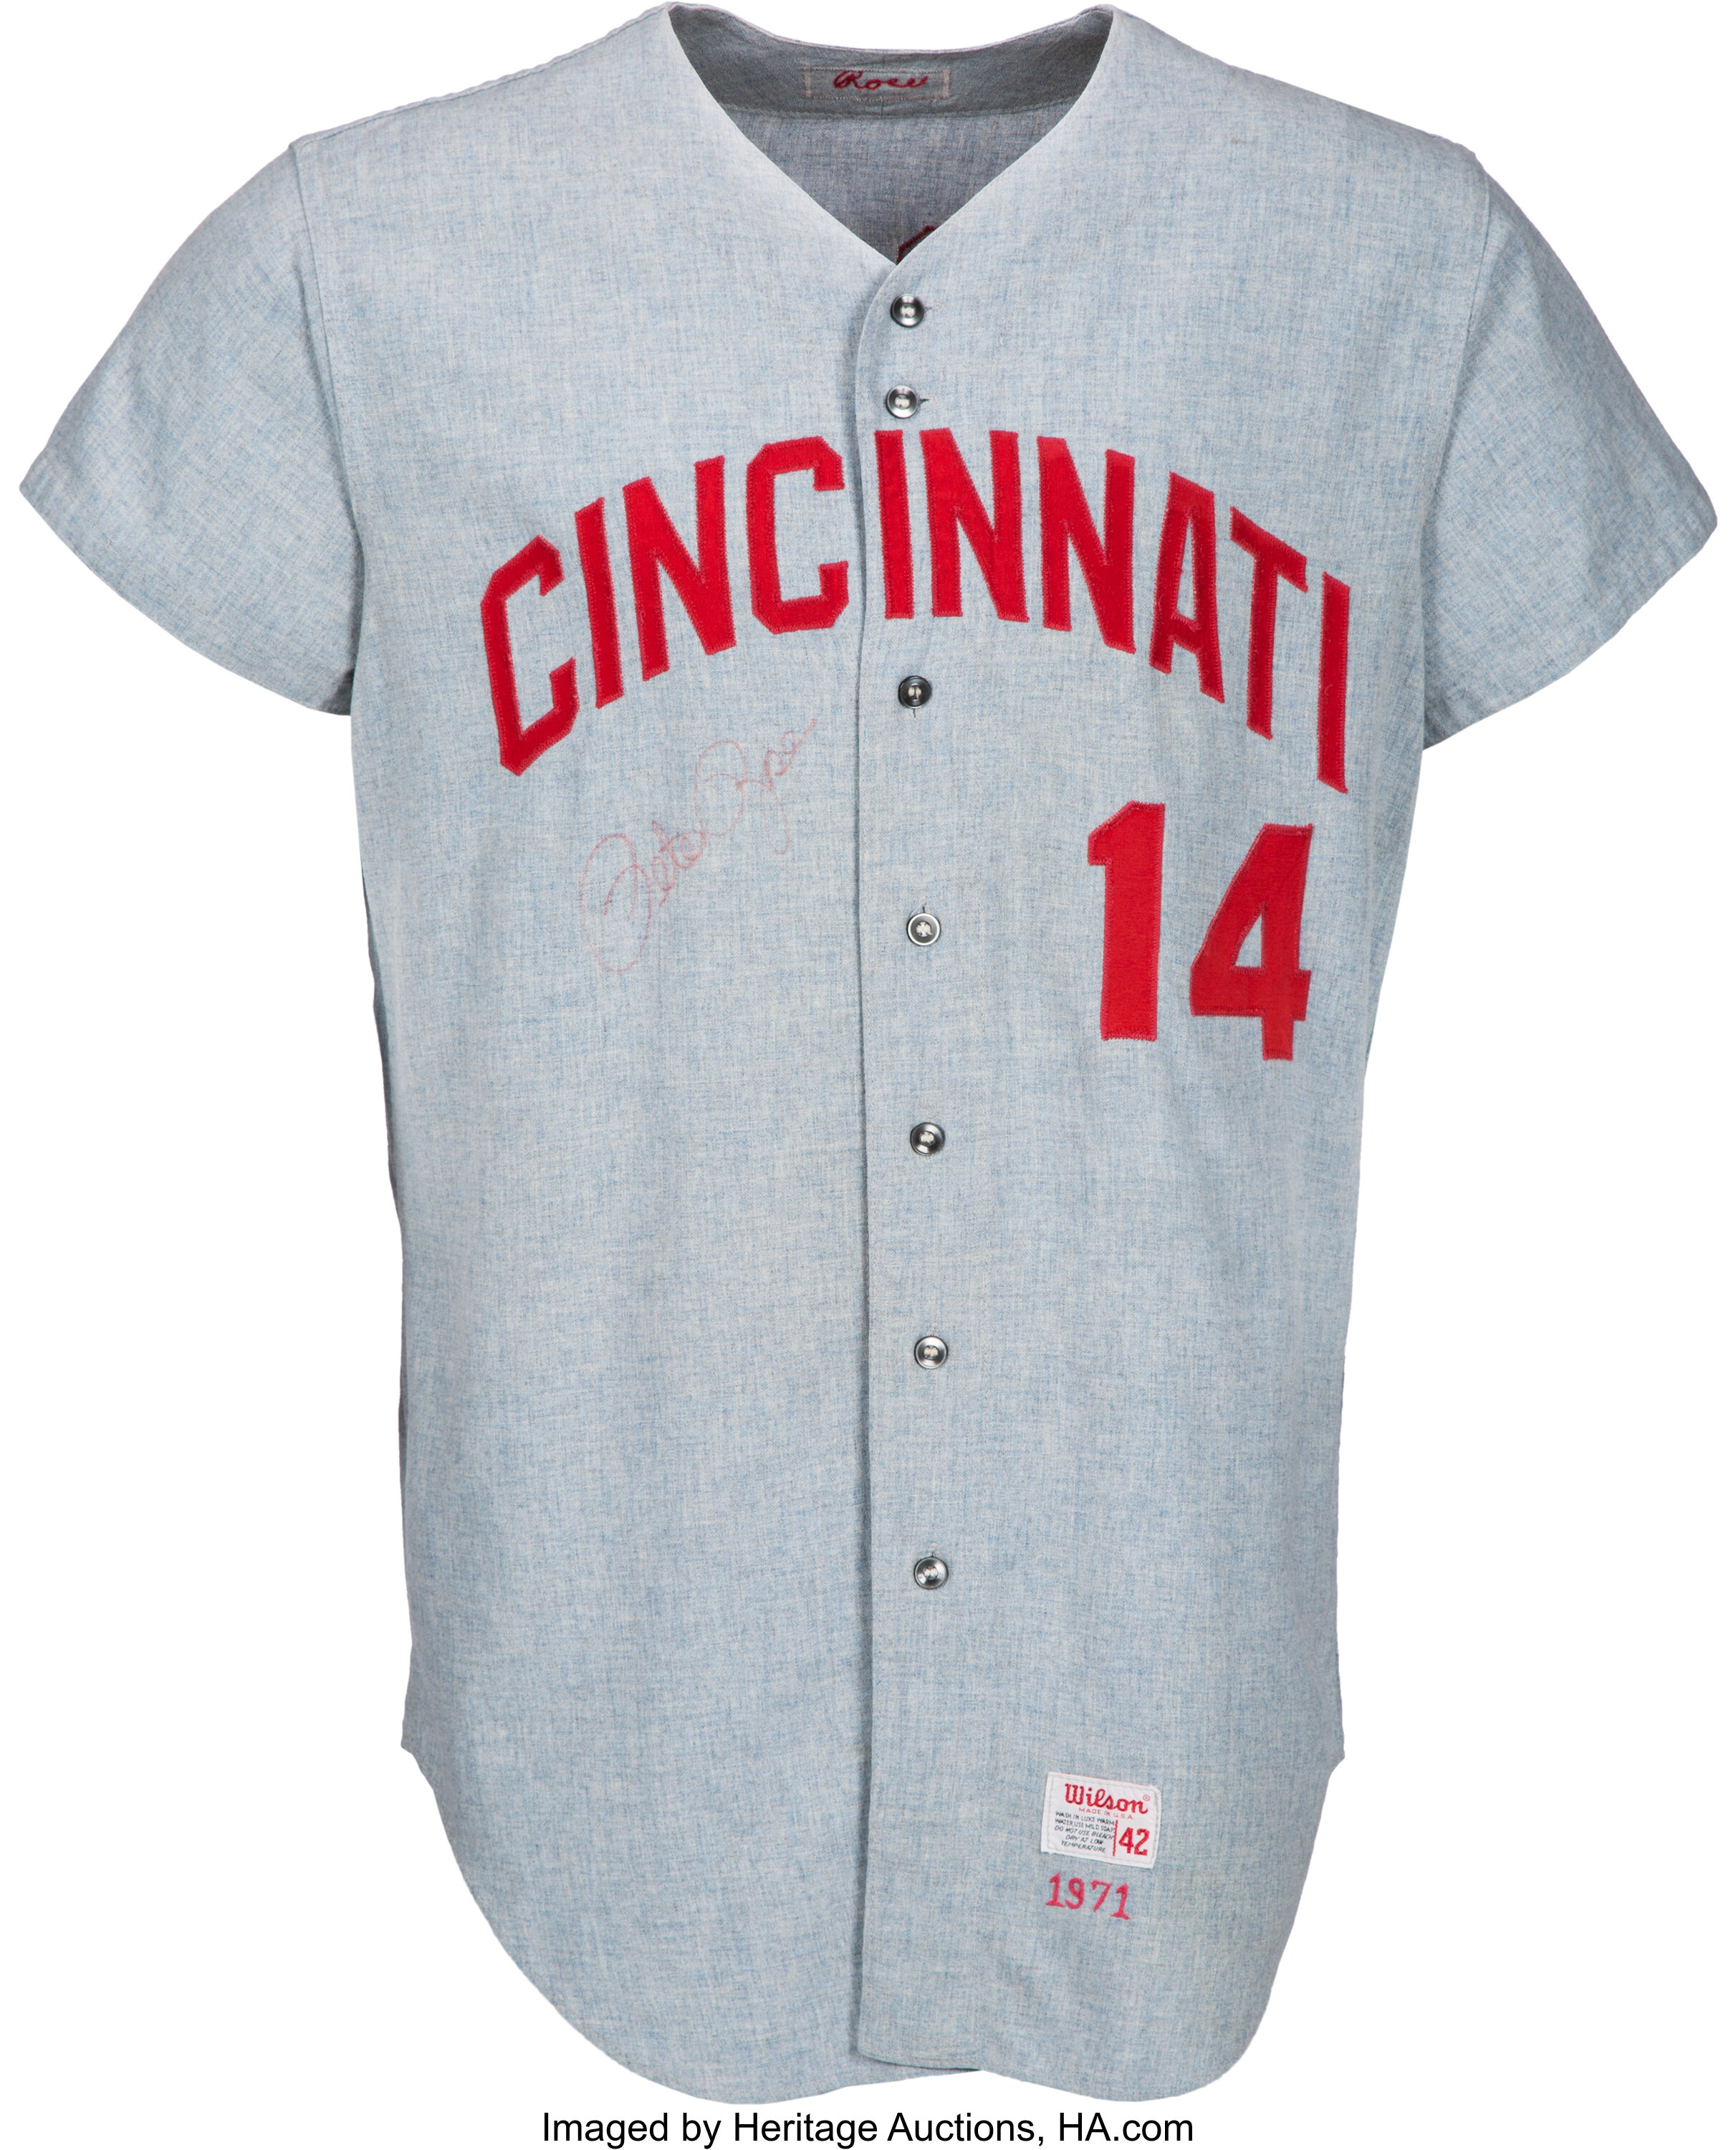 Authentic Cincinnati Reds Red Stockings 1869 Throwback TBC Jersey